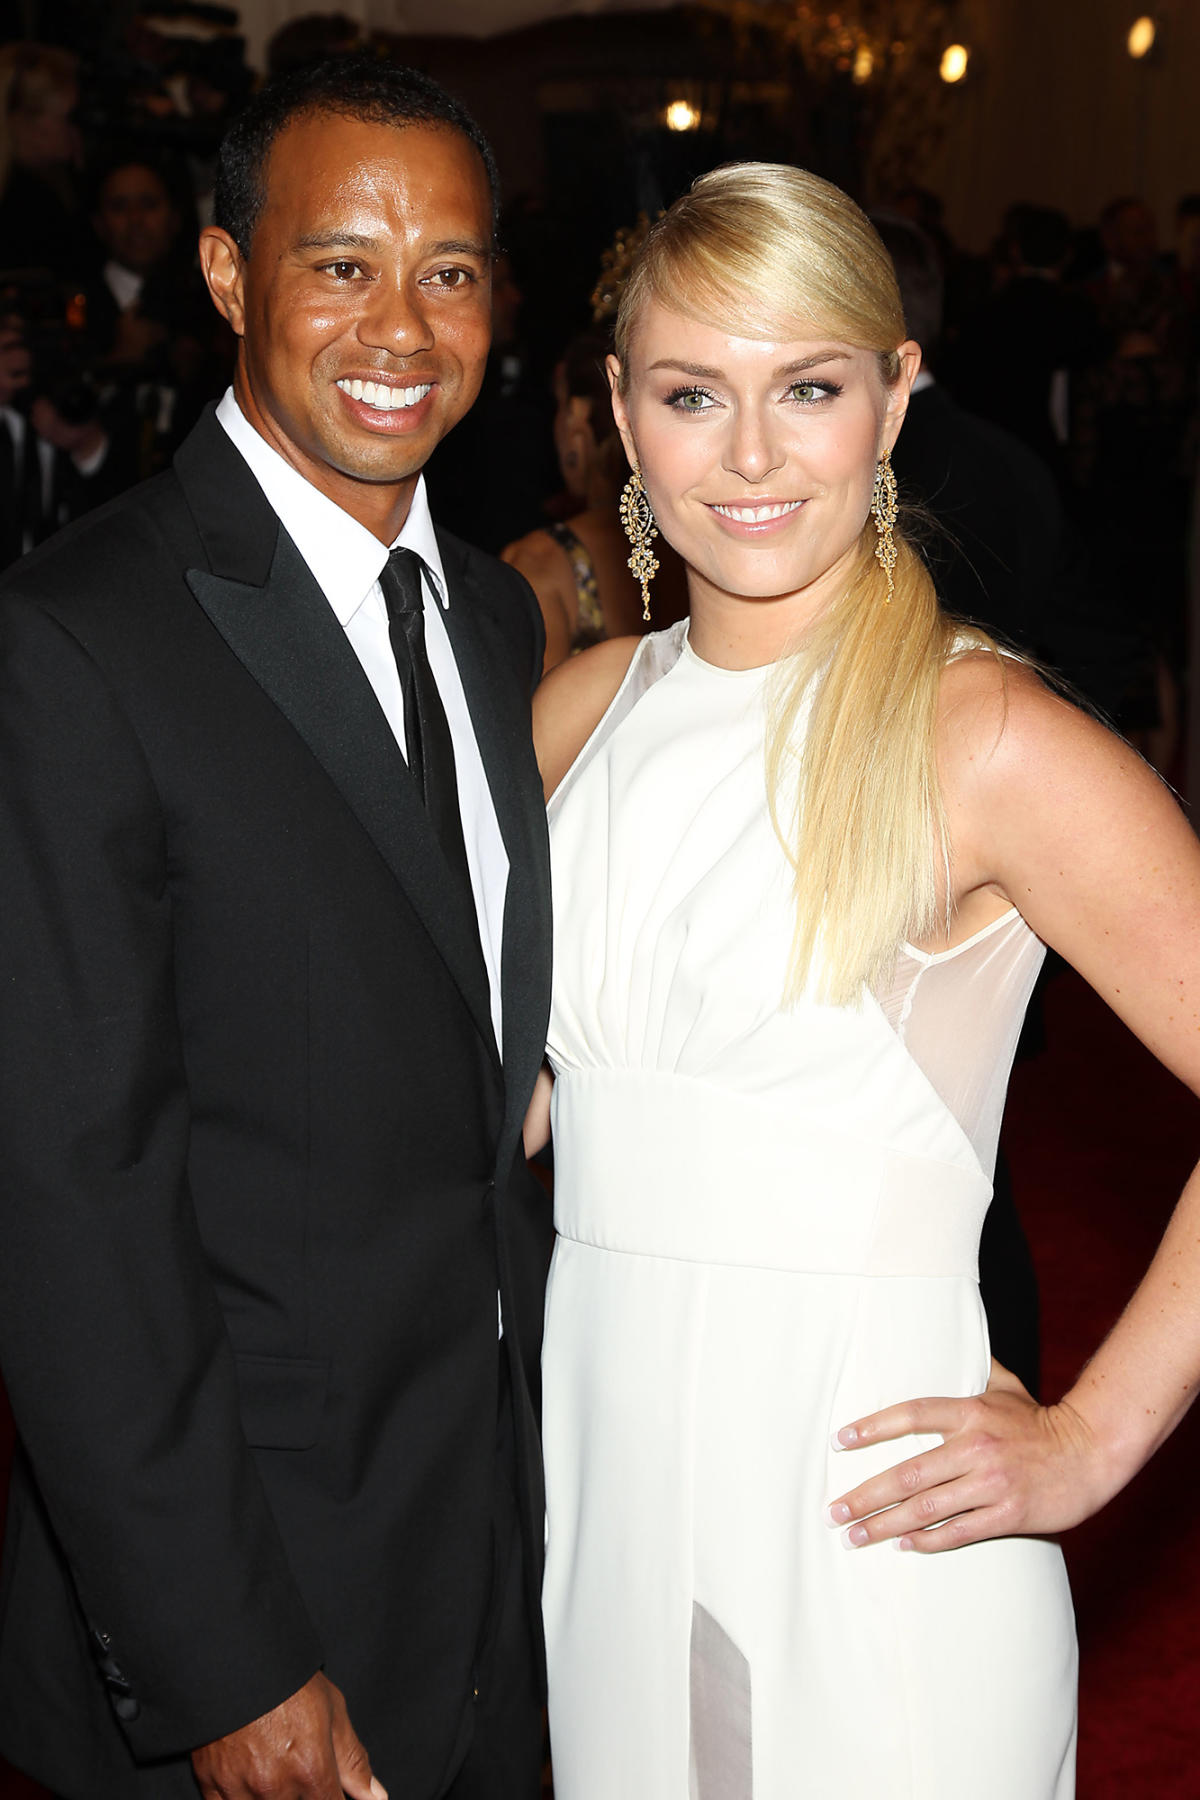 Tiger Woods Dating History The Golfers Marriage, Mistresses, Girlfriends and More image